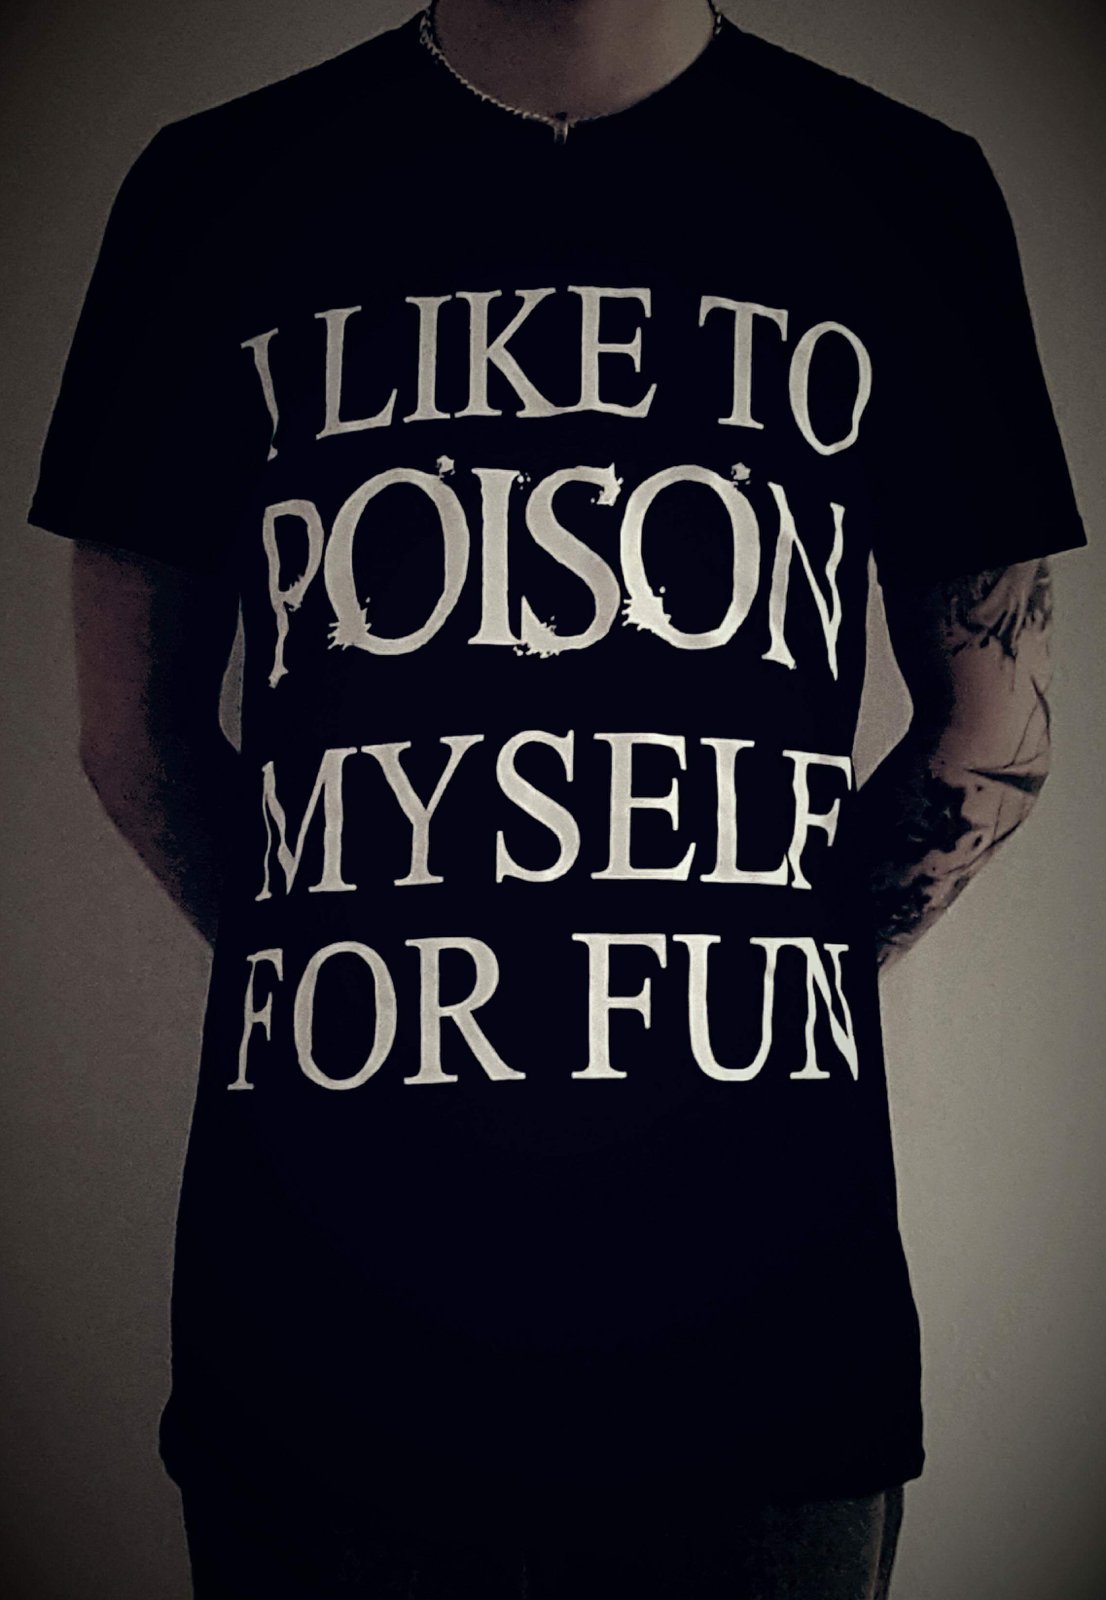 Image of Poison Tee